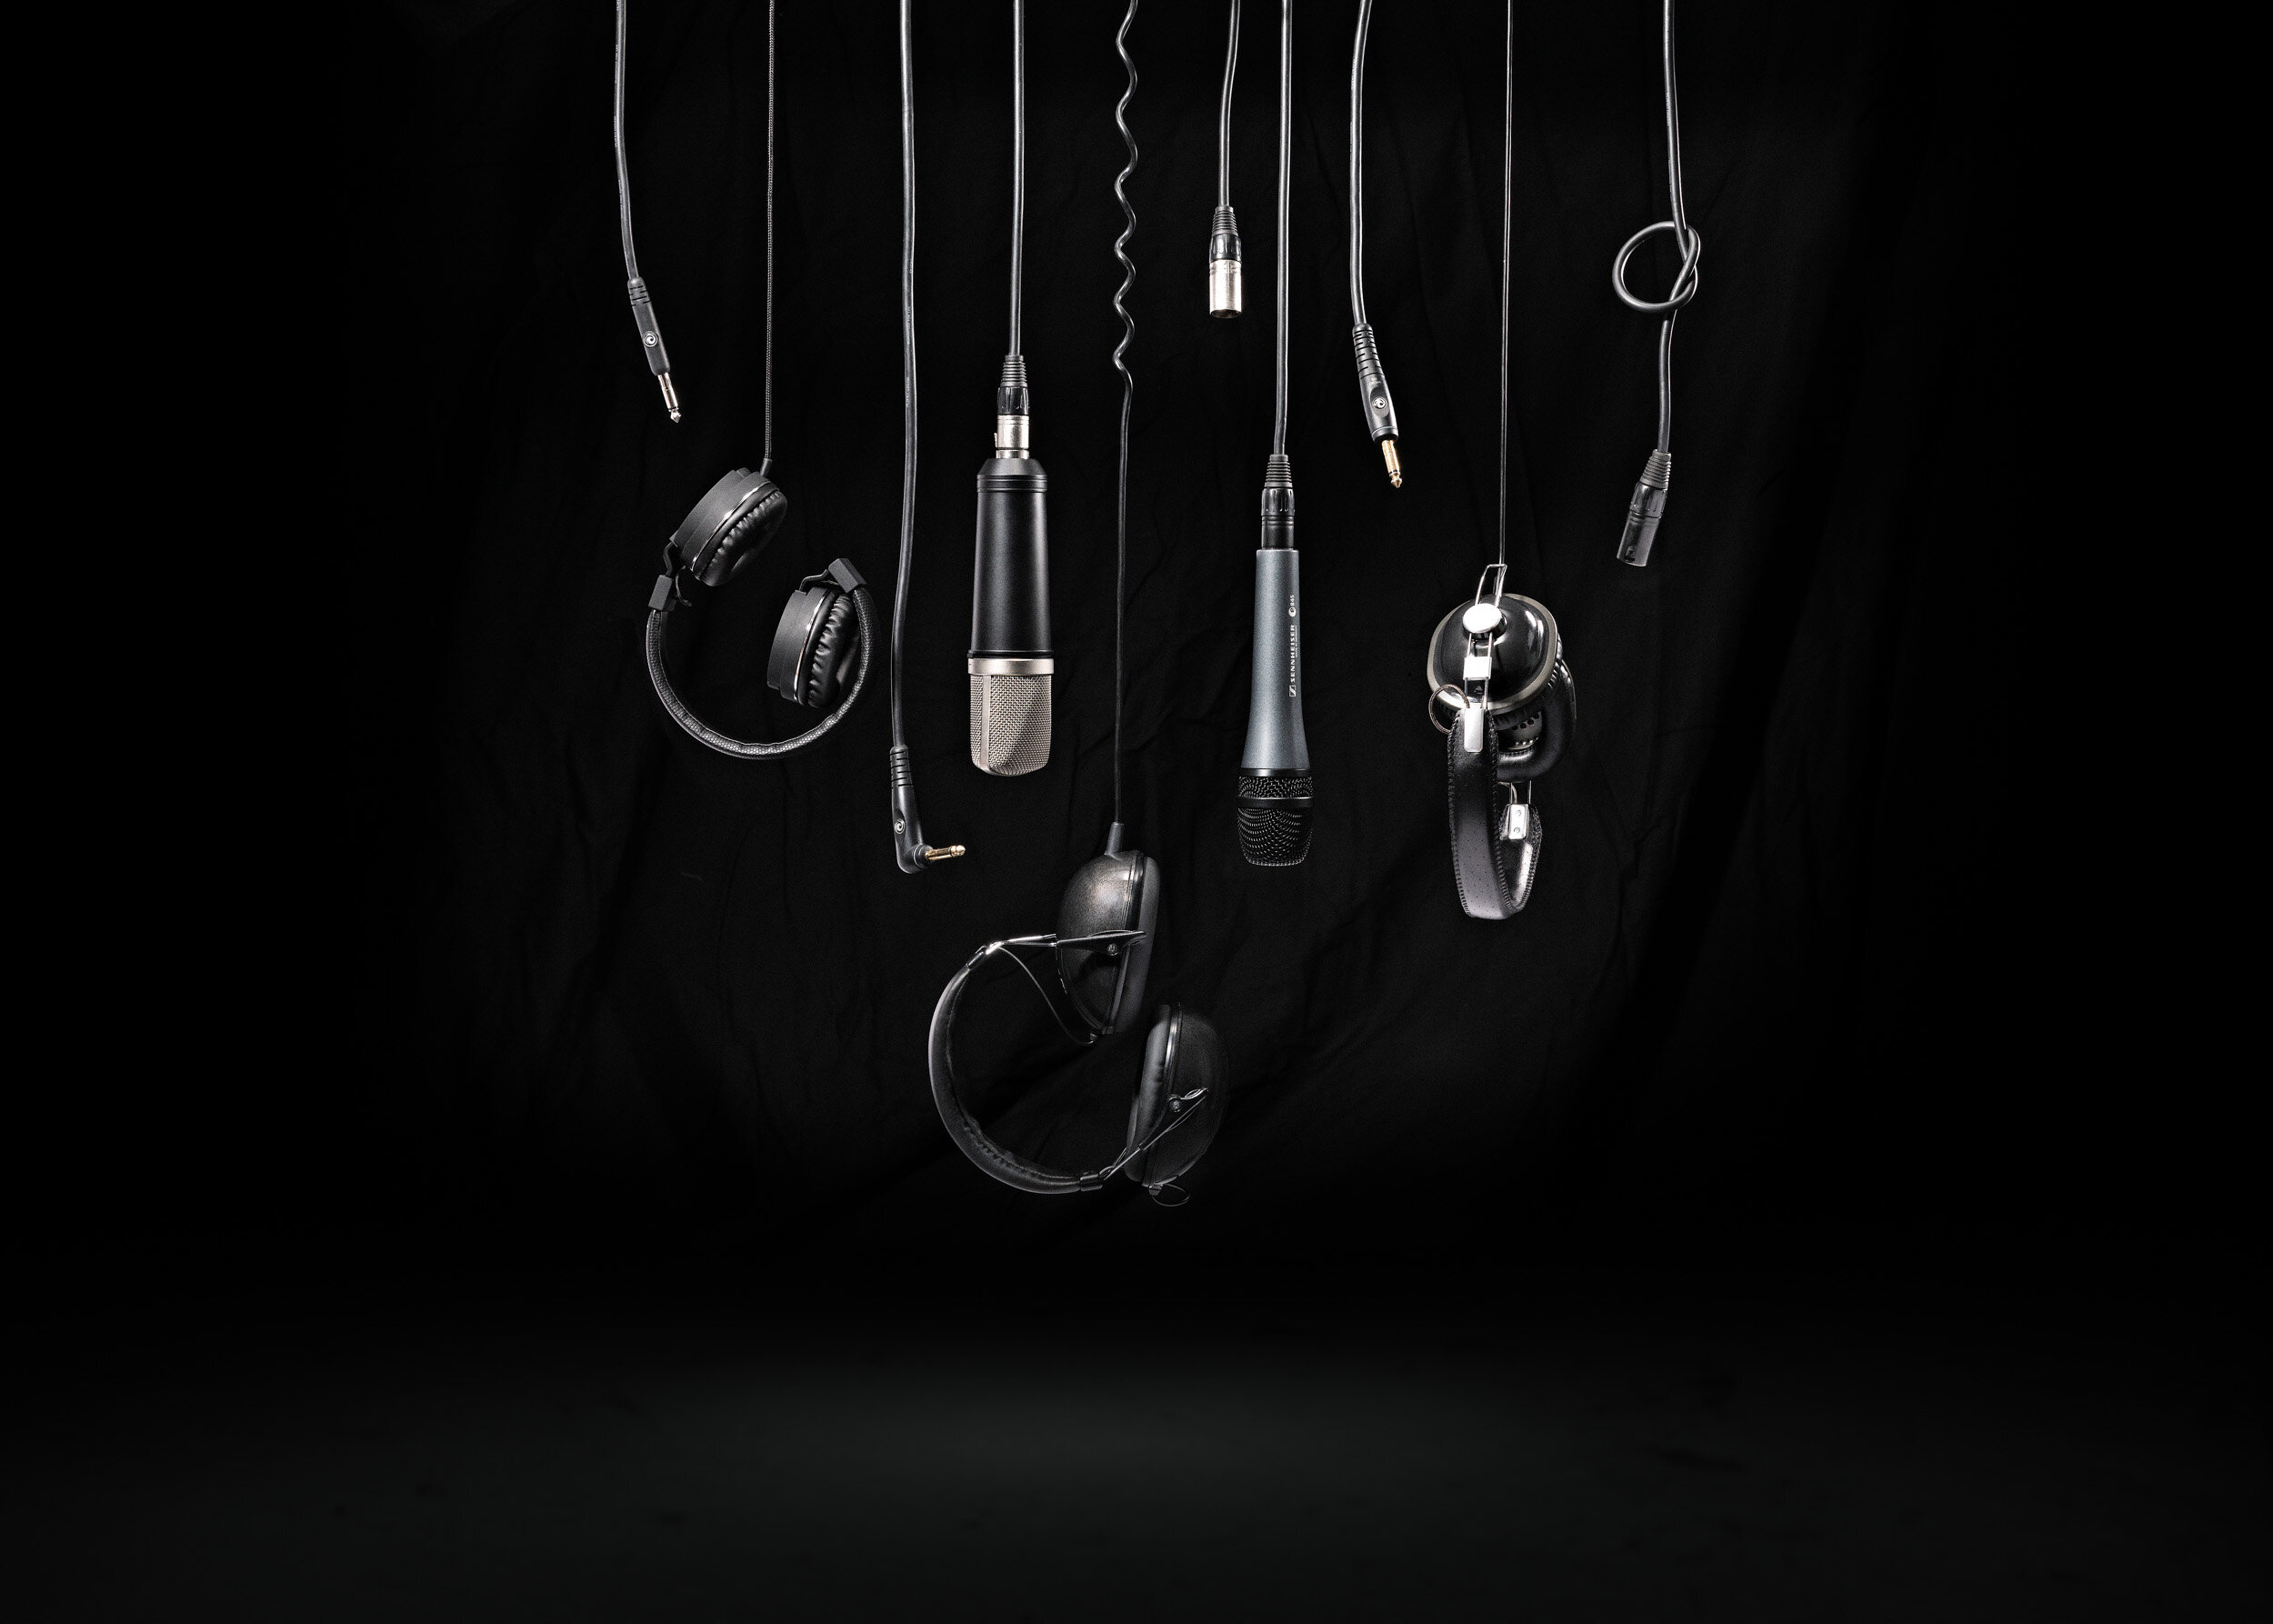 Hanging Headphones and Microphones | Commercial Product Shot  (Copy)